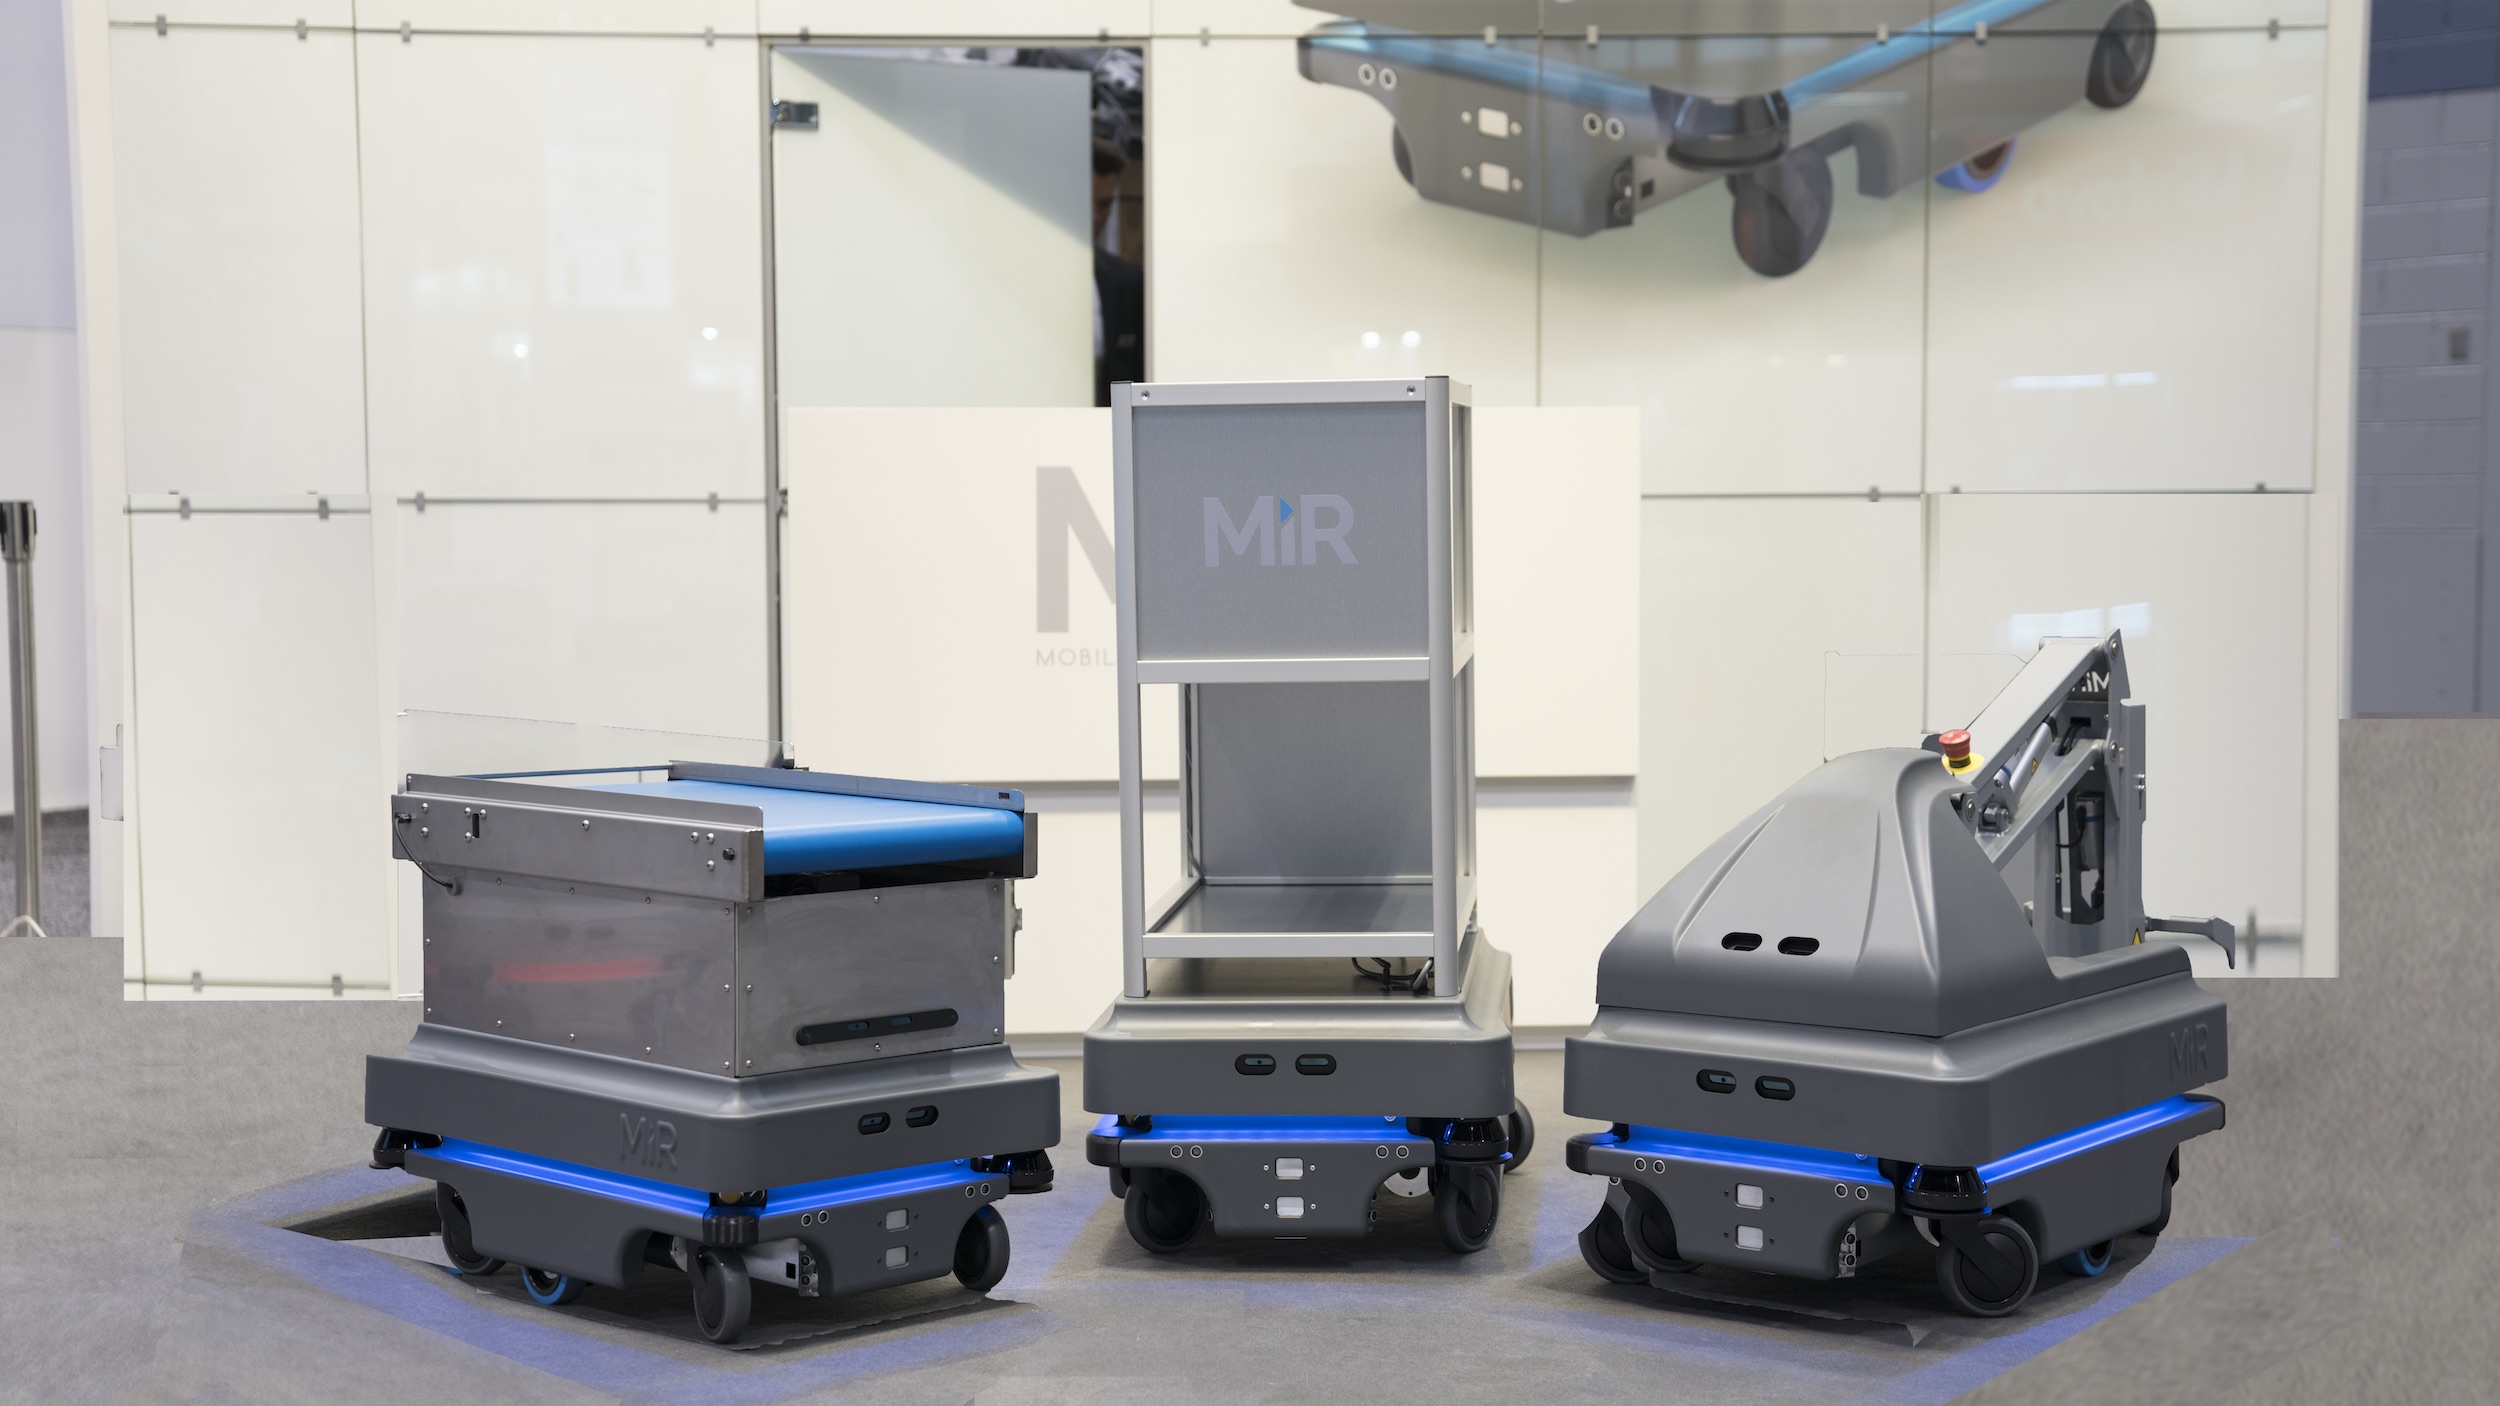 duft Resistente syndrom Teradyne snatches up robot maker MiR in $272M deal | TechCrunch